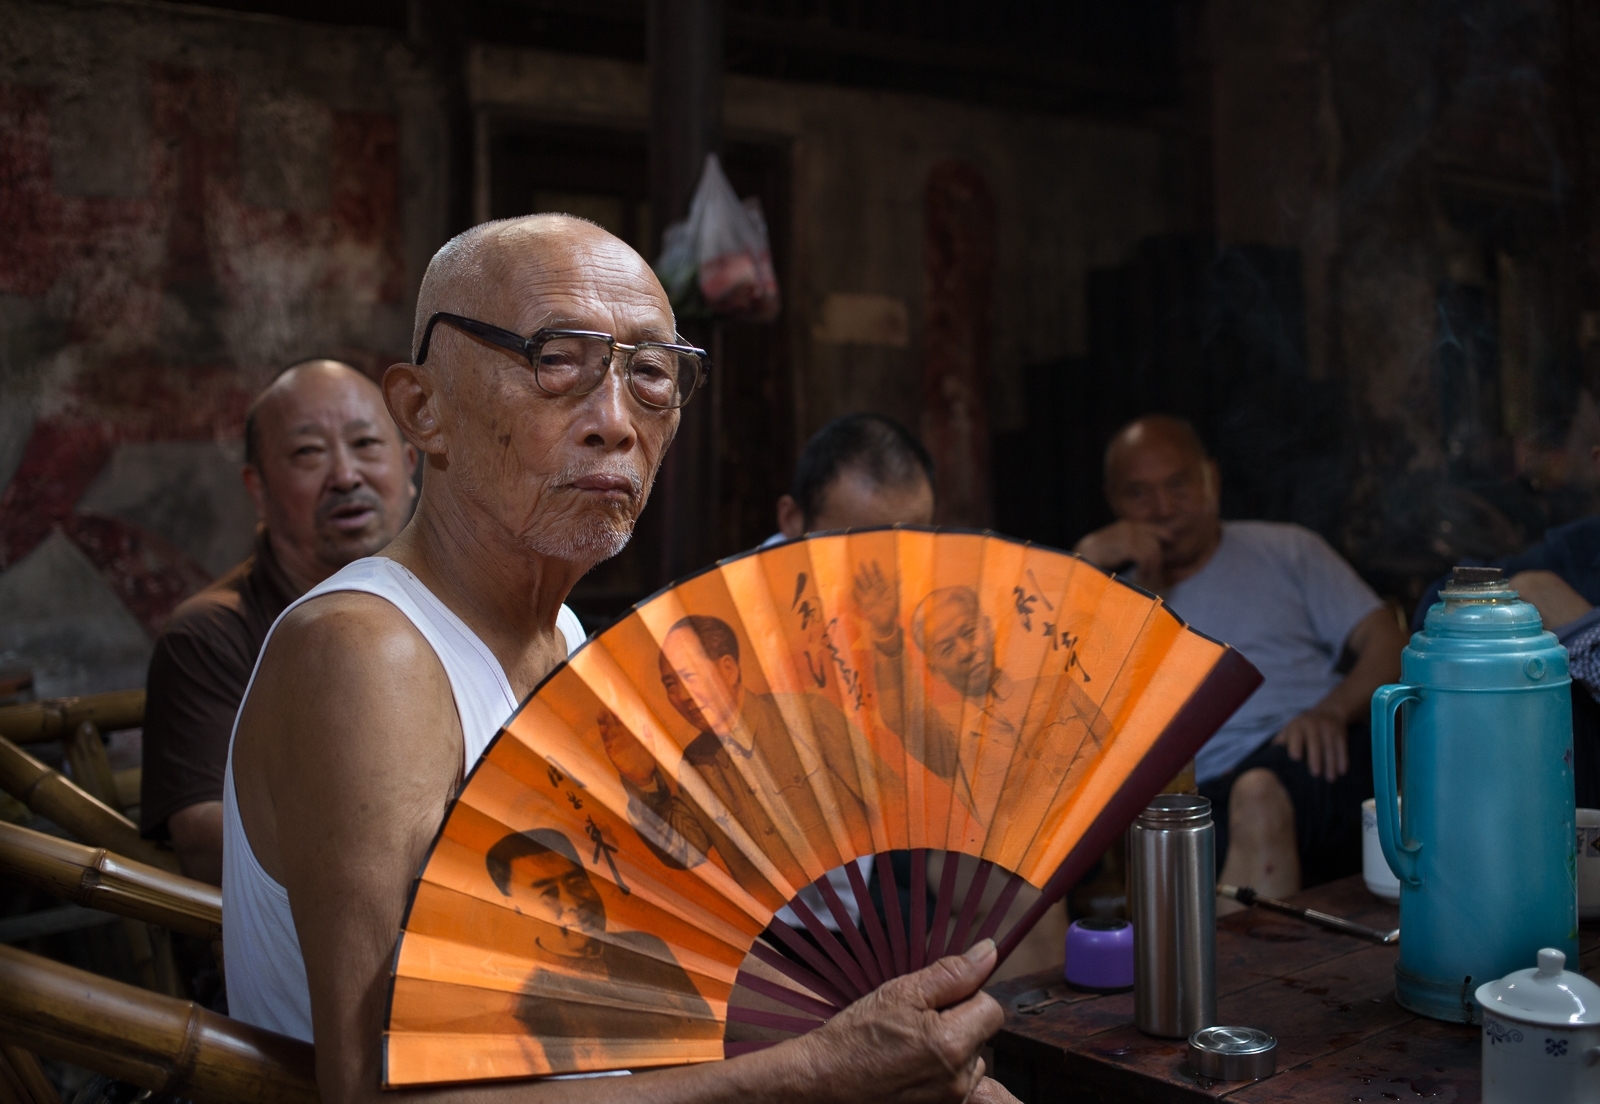 'Local Men Relaxing in The Old Teahouse in Chengdu, China.' (TM 1 Place) by Dorothy Weaver - MR